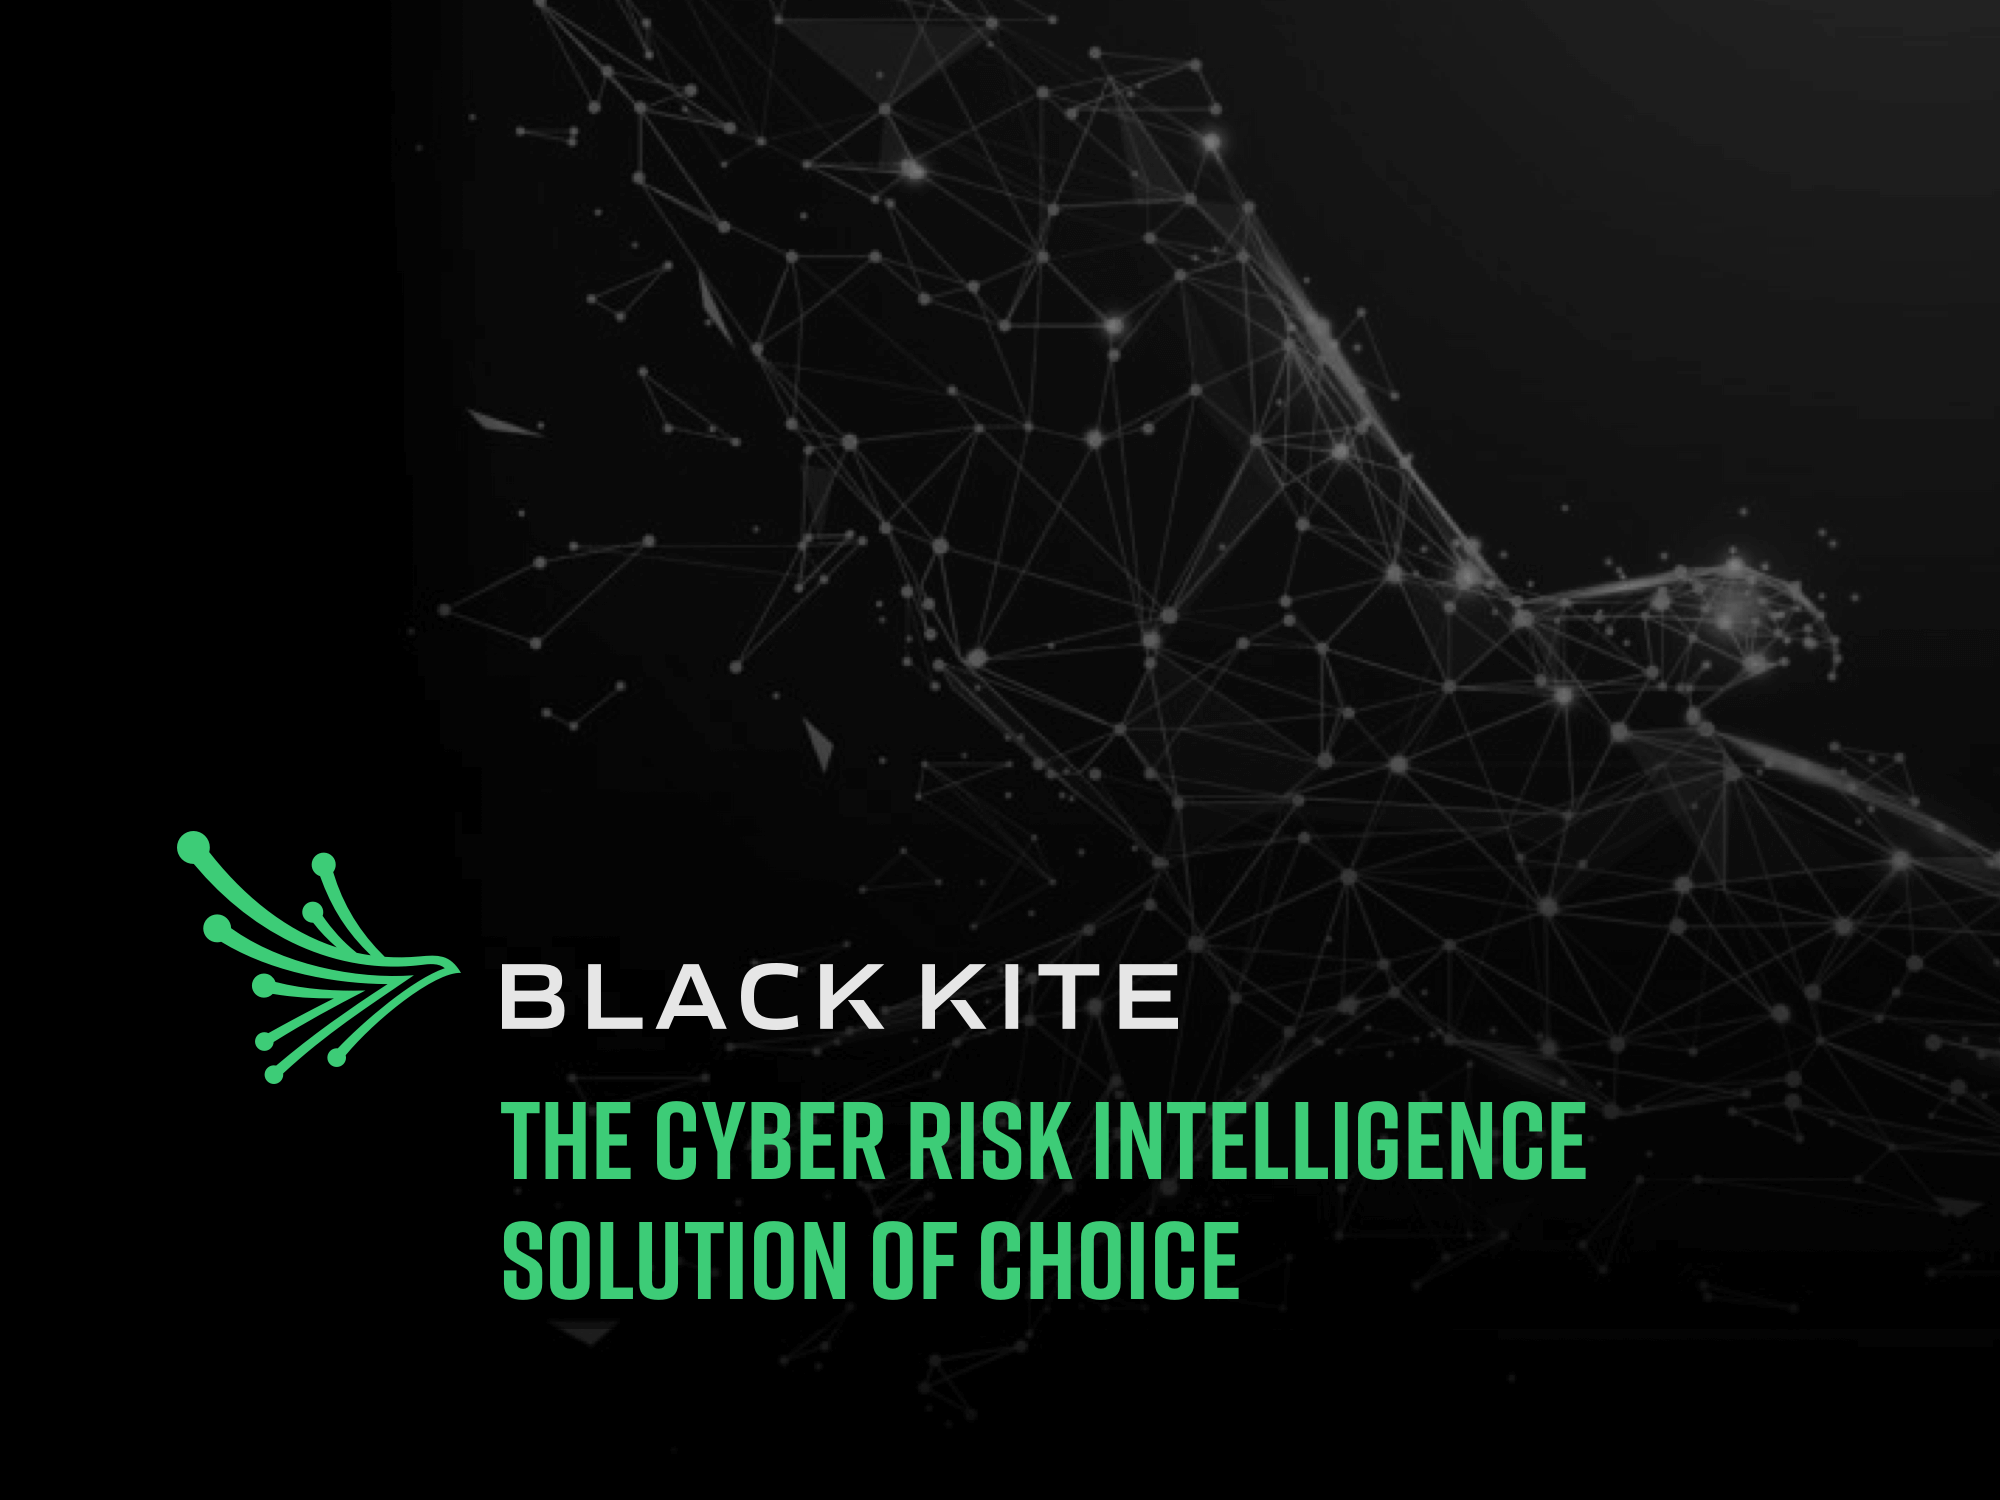 The Cyber Risk Intelligence Solution of Choice